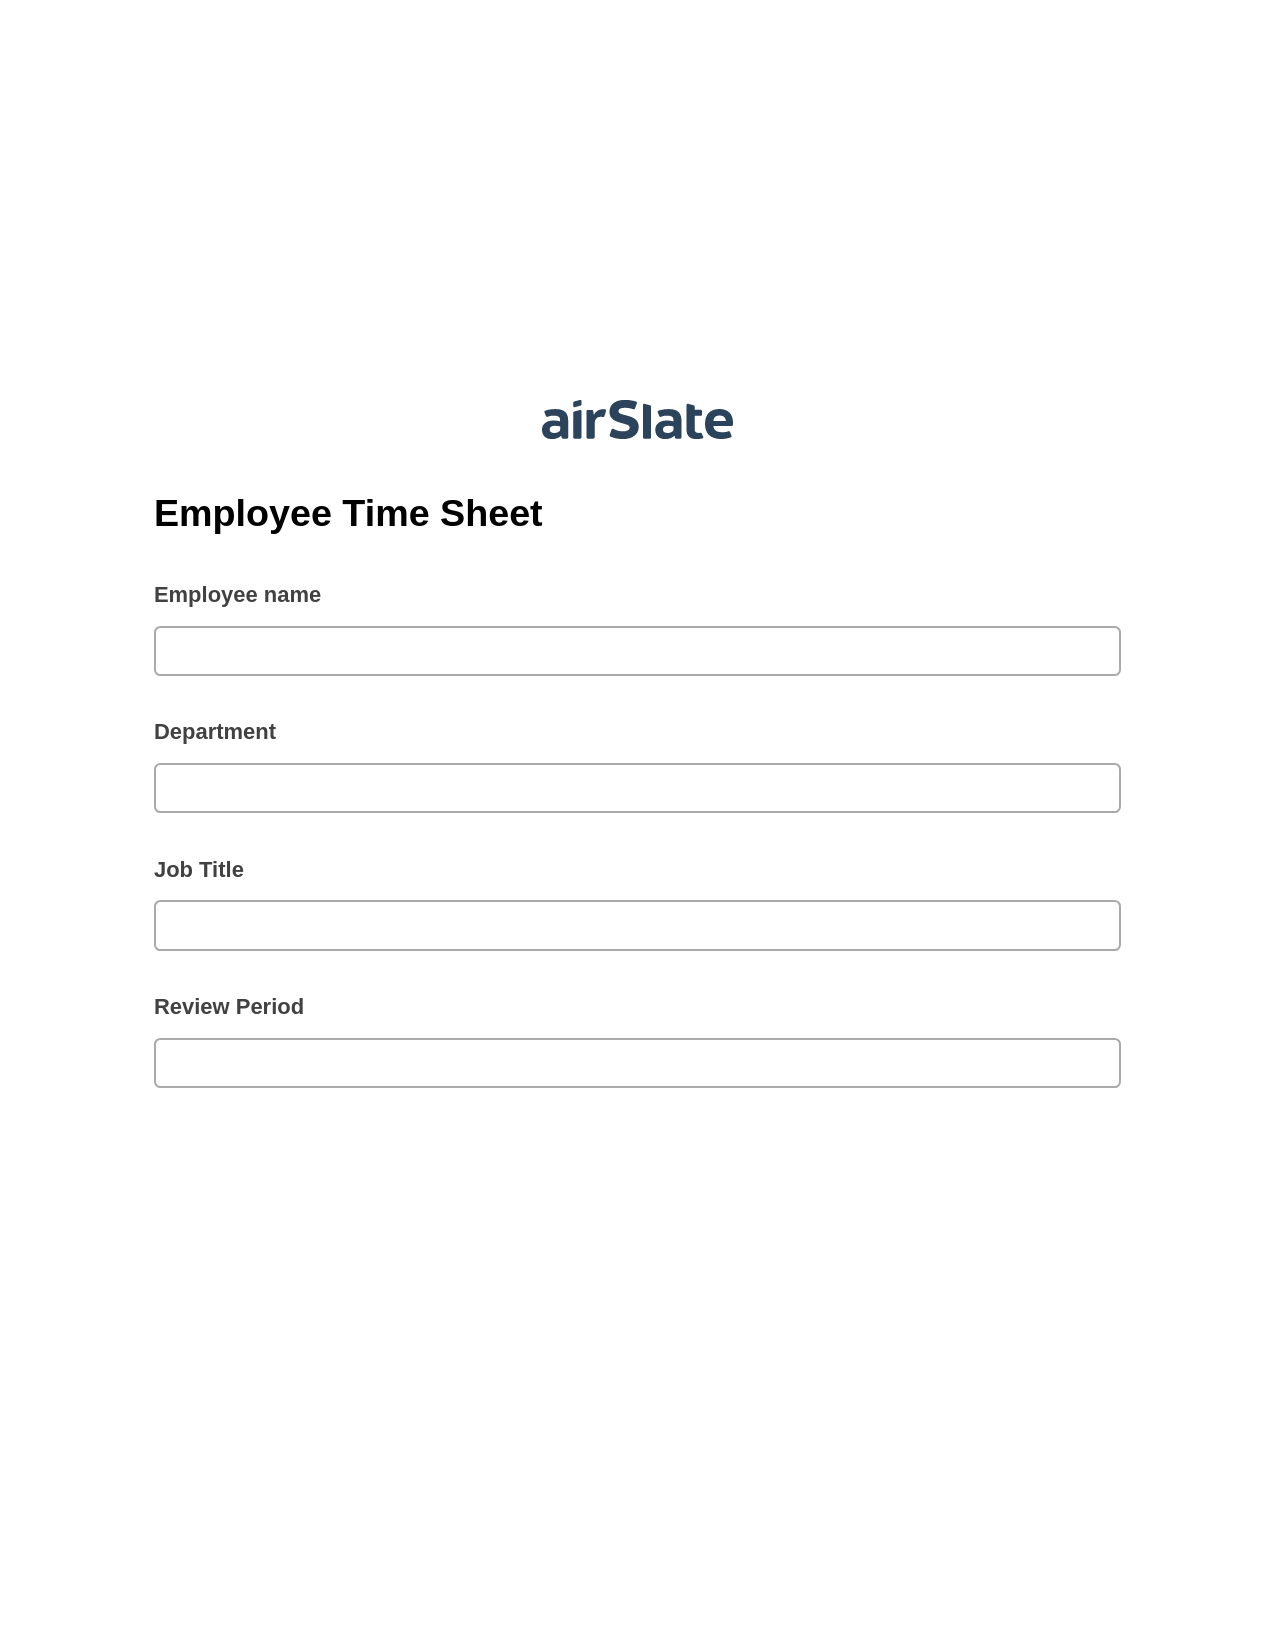 Multirole Employee Time Sheet Pre-fill Dropdowns from Airtable, Create slate addon, Export to Excel 365 Bot